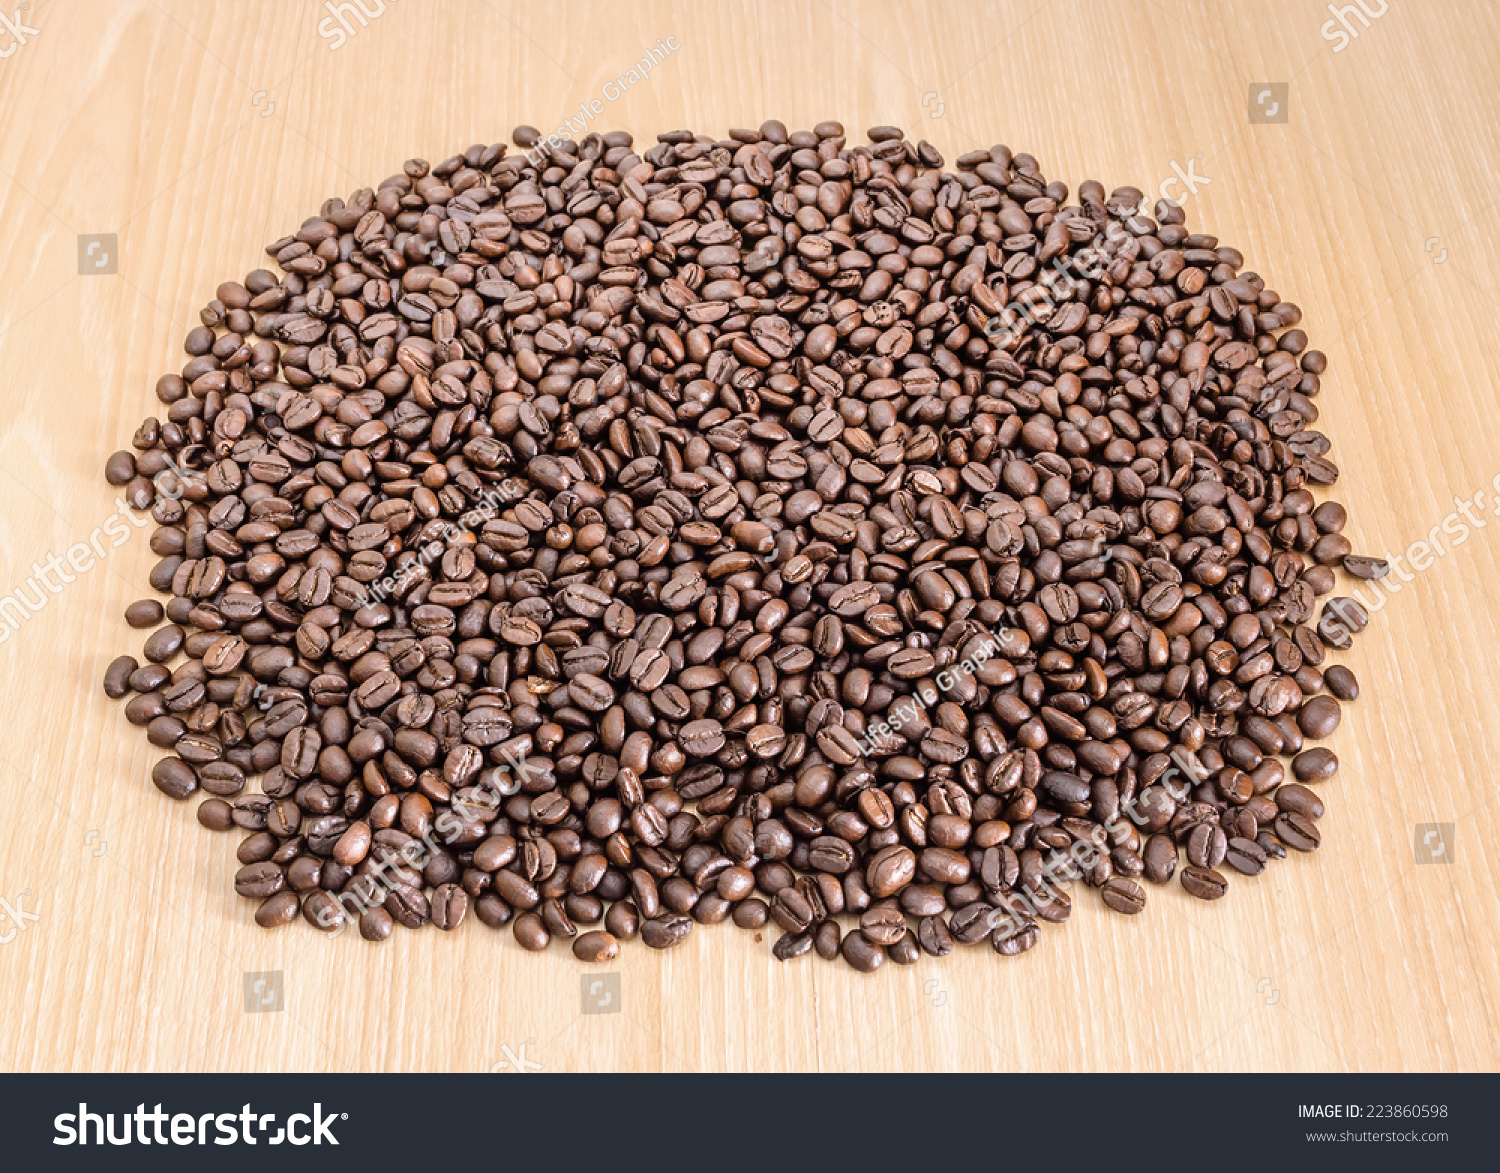 Coffee beans on wooden background. #223860598